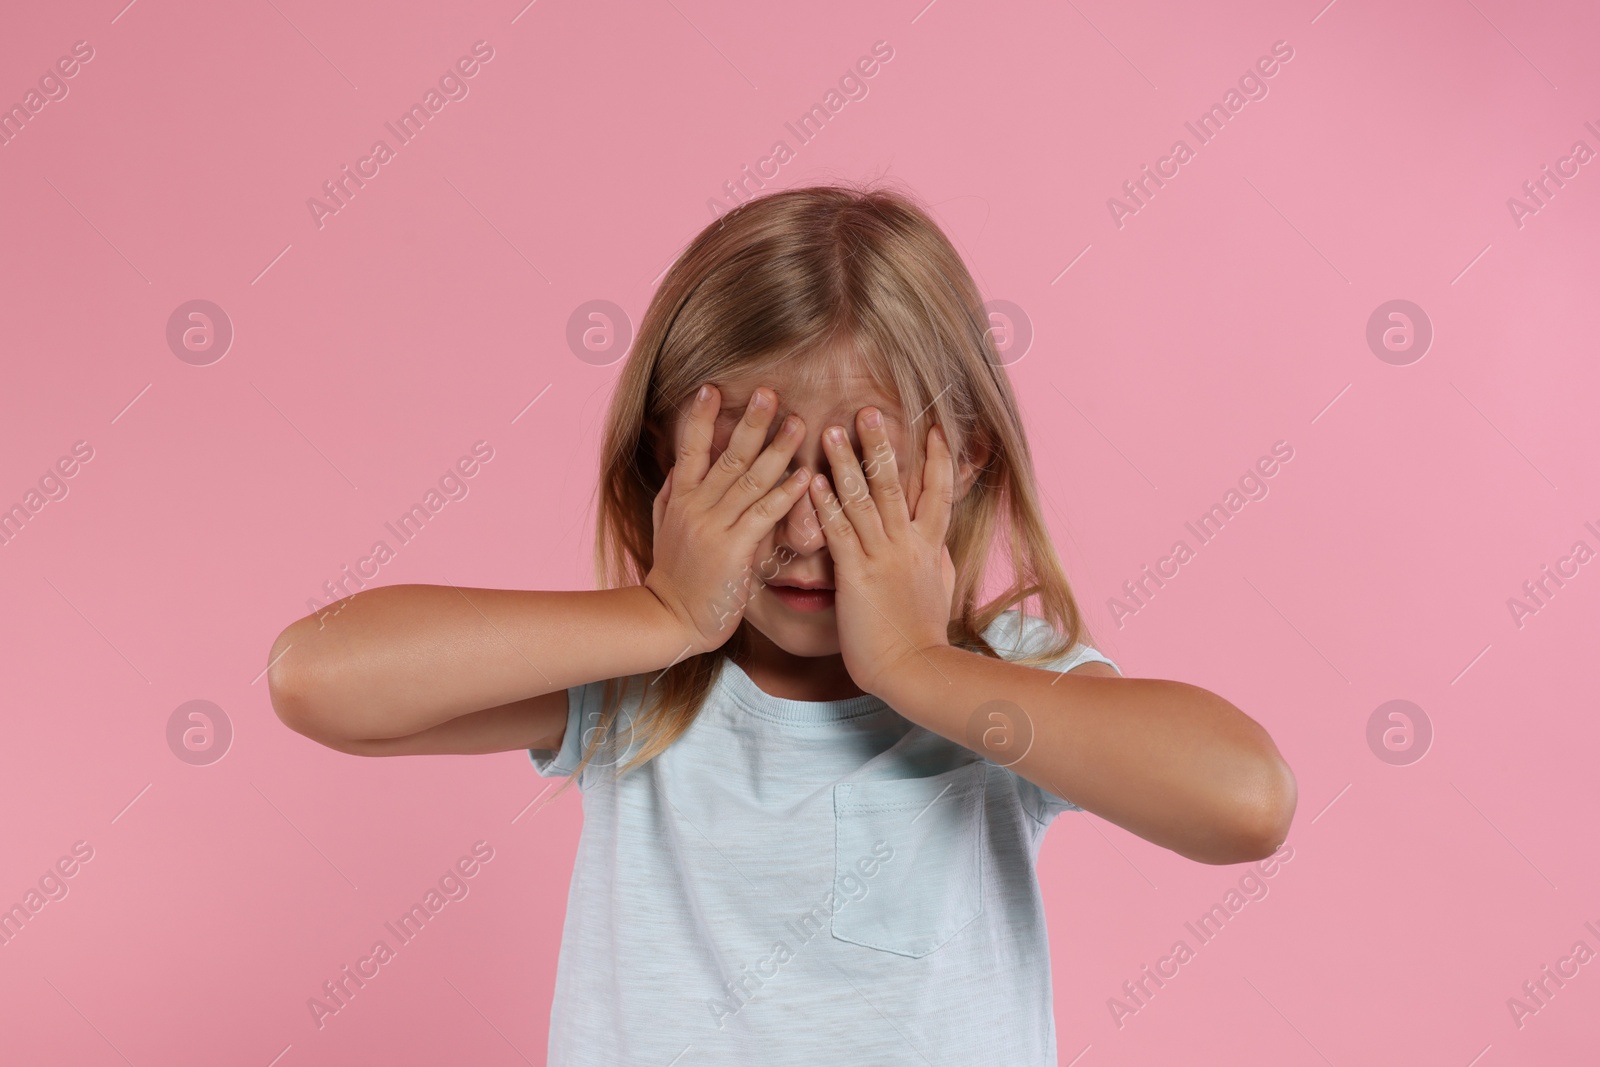 Photo of Resentful girl covering face with hands on pink background